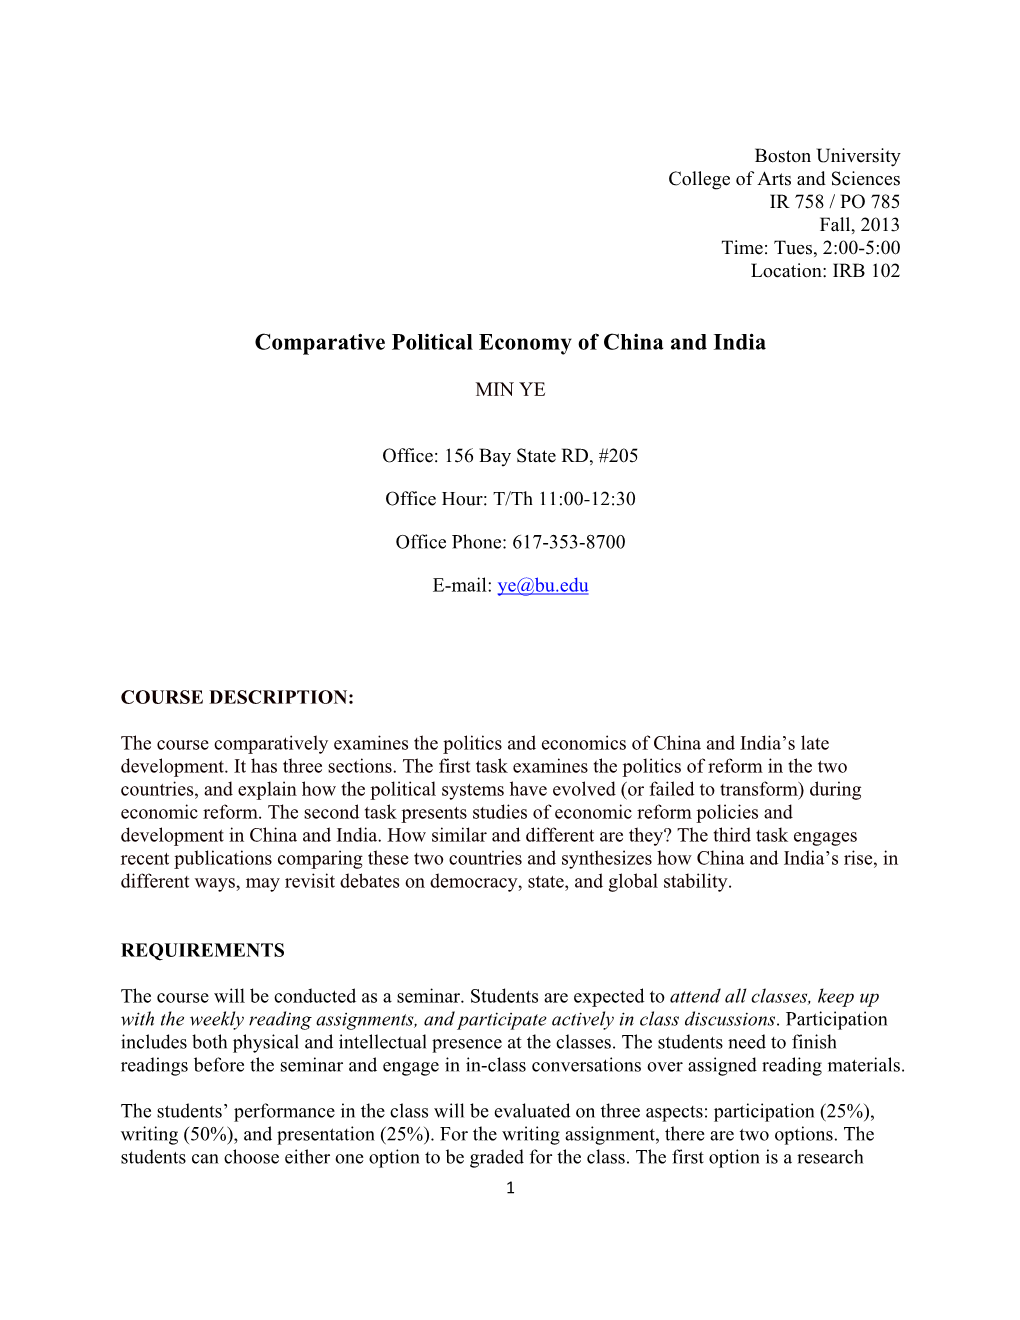 Comparative Political Economy of China and India